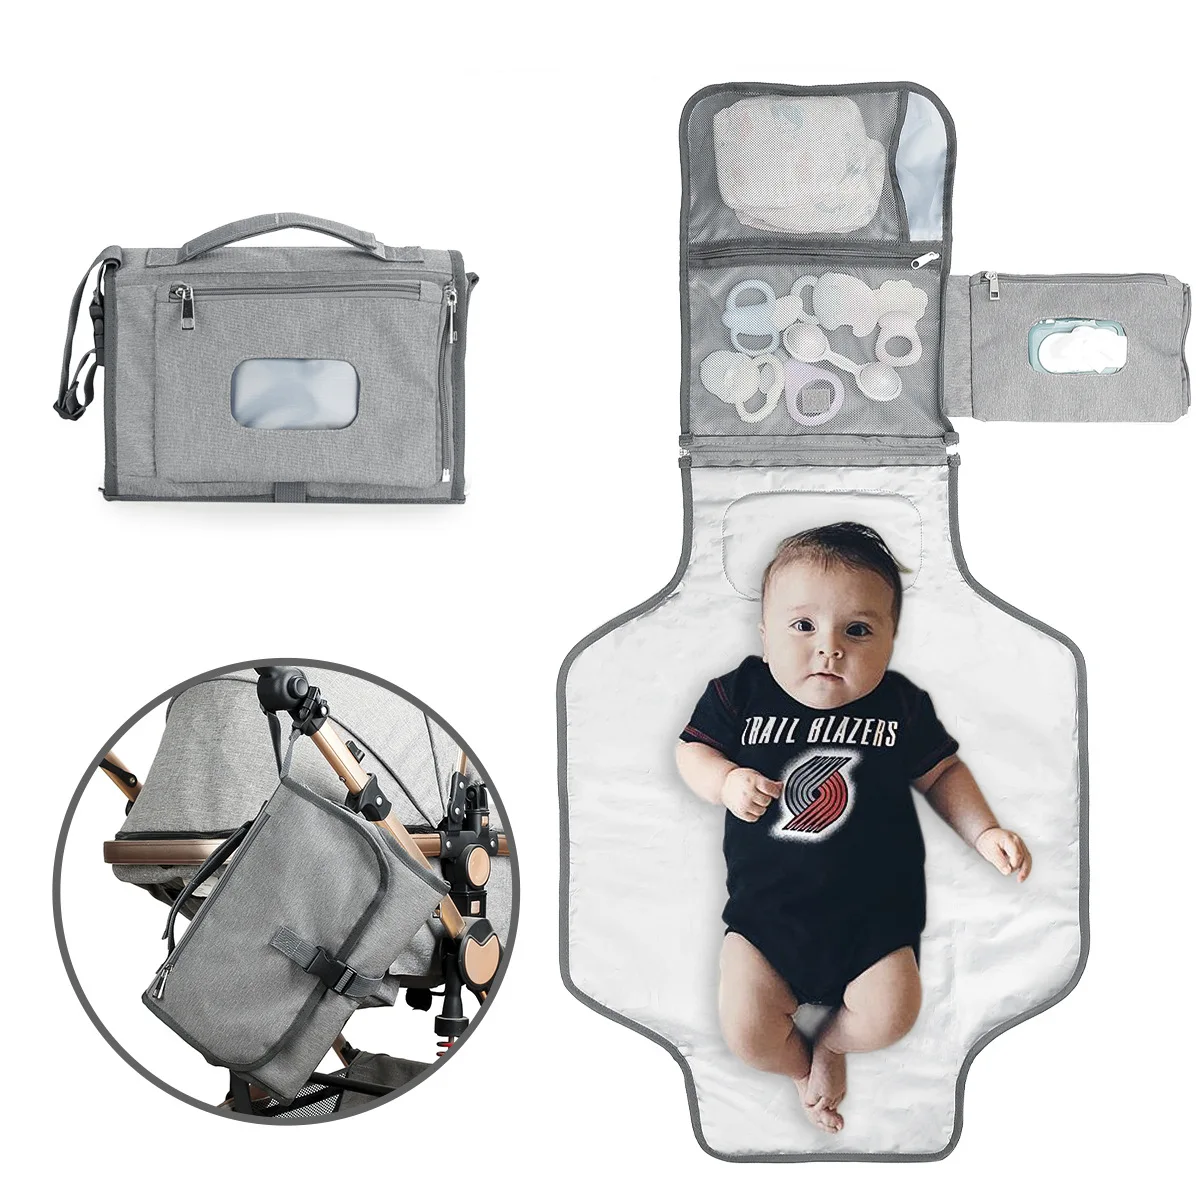 Diaper Changing Pad Baby Stroller Attachable Organiser Water-Resistant Bag Baby Safe Sling Bag 